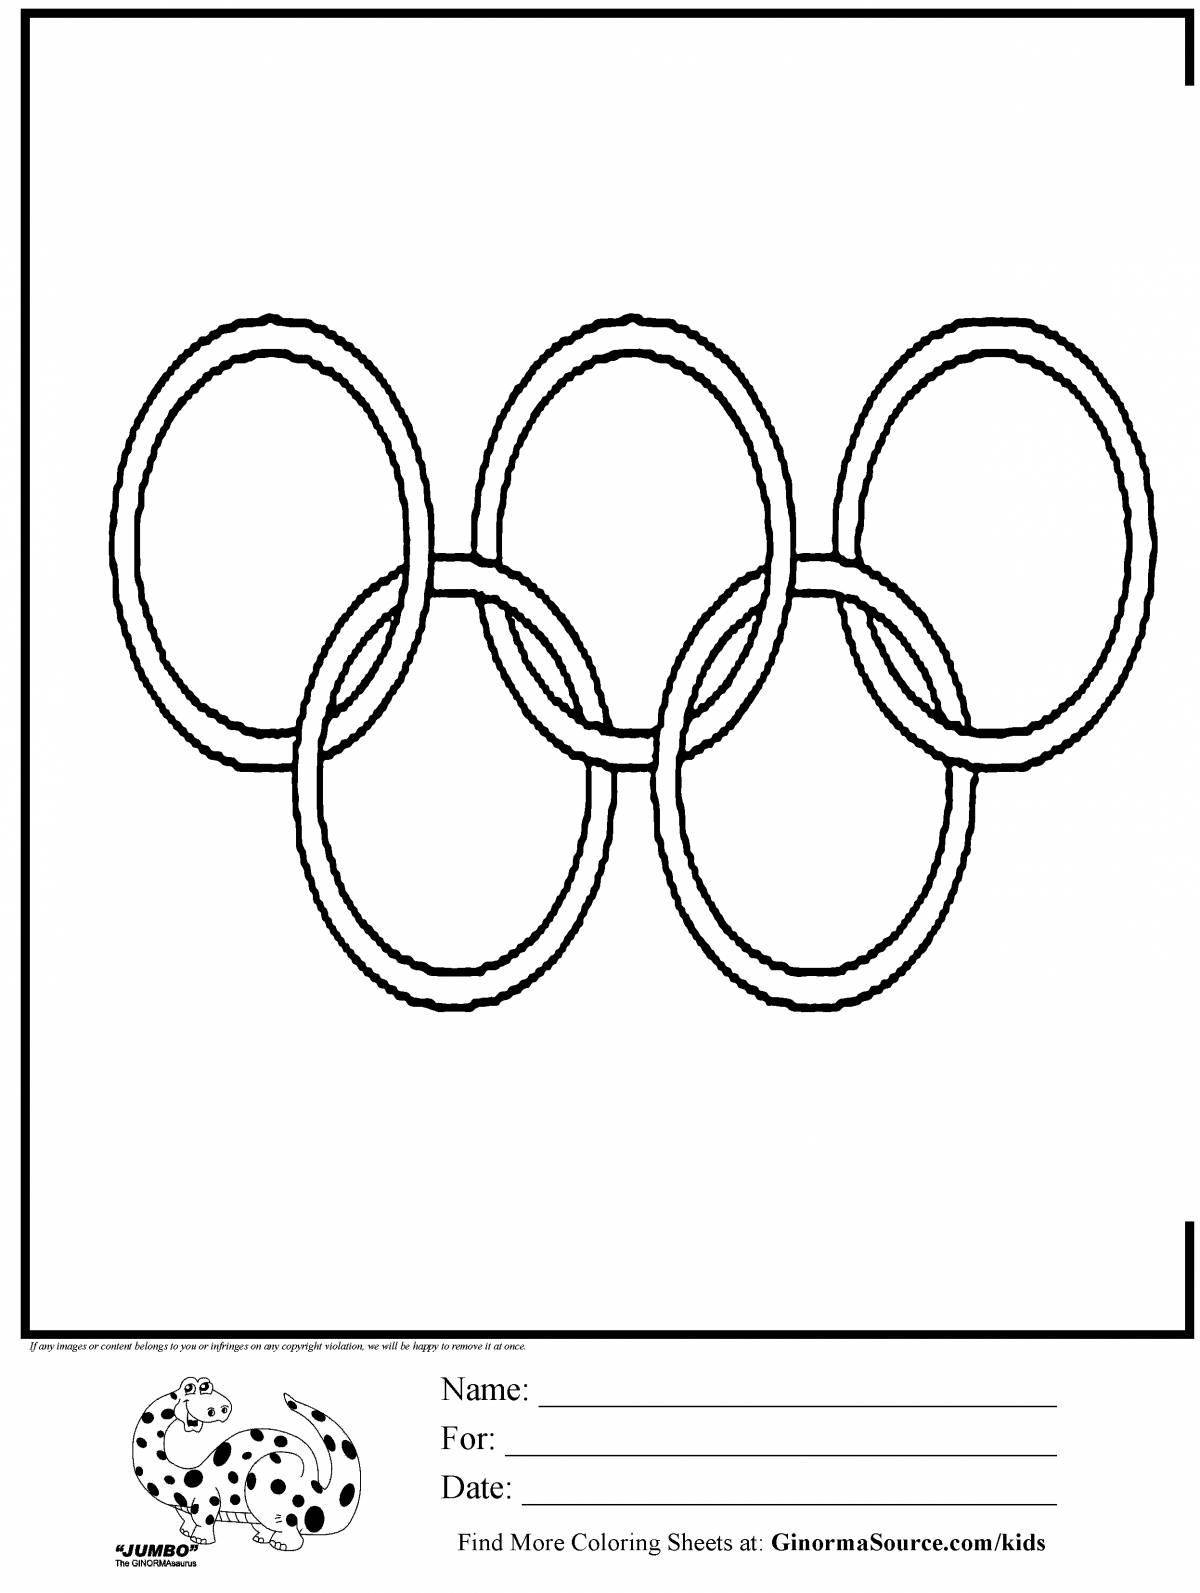 Rampant Olympic flag coloring page